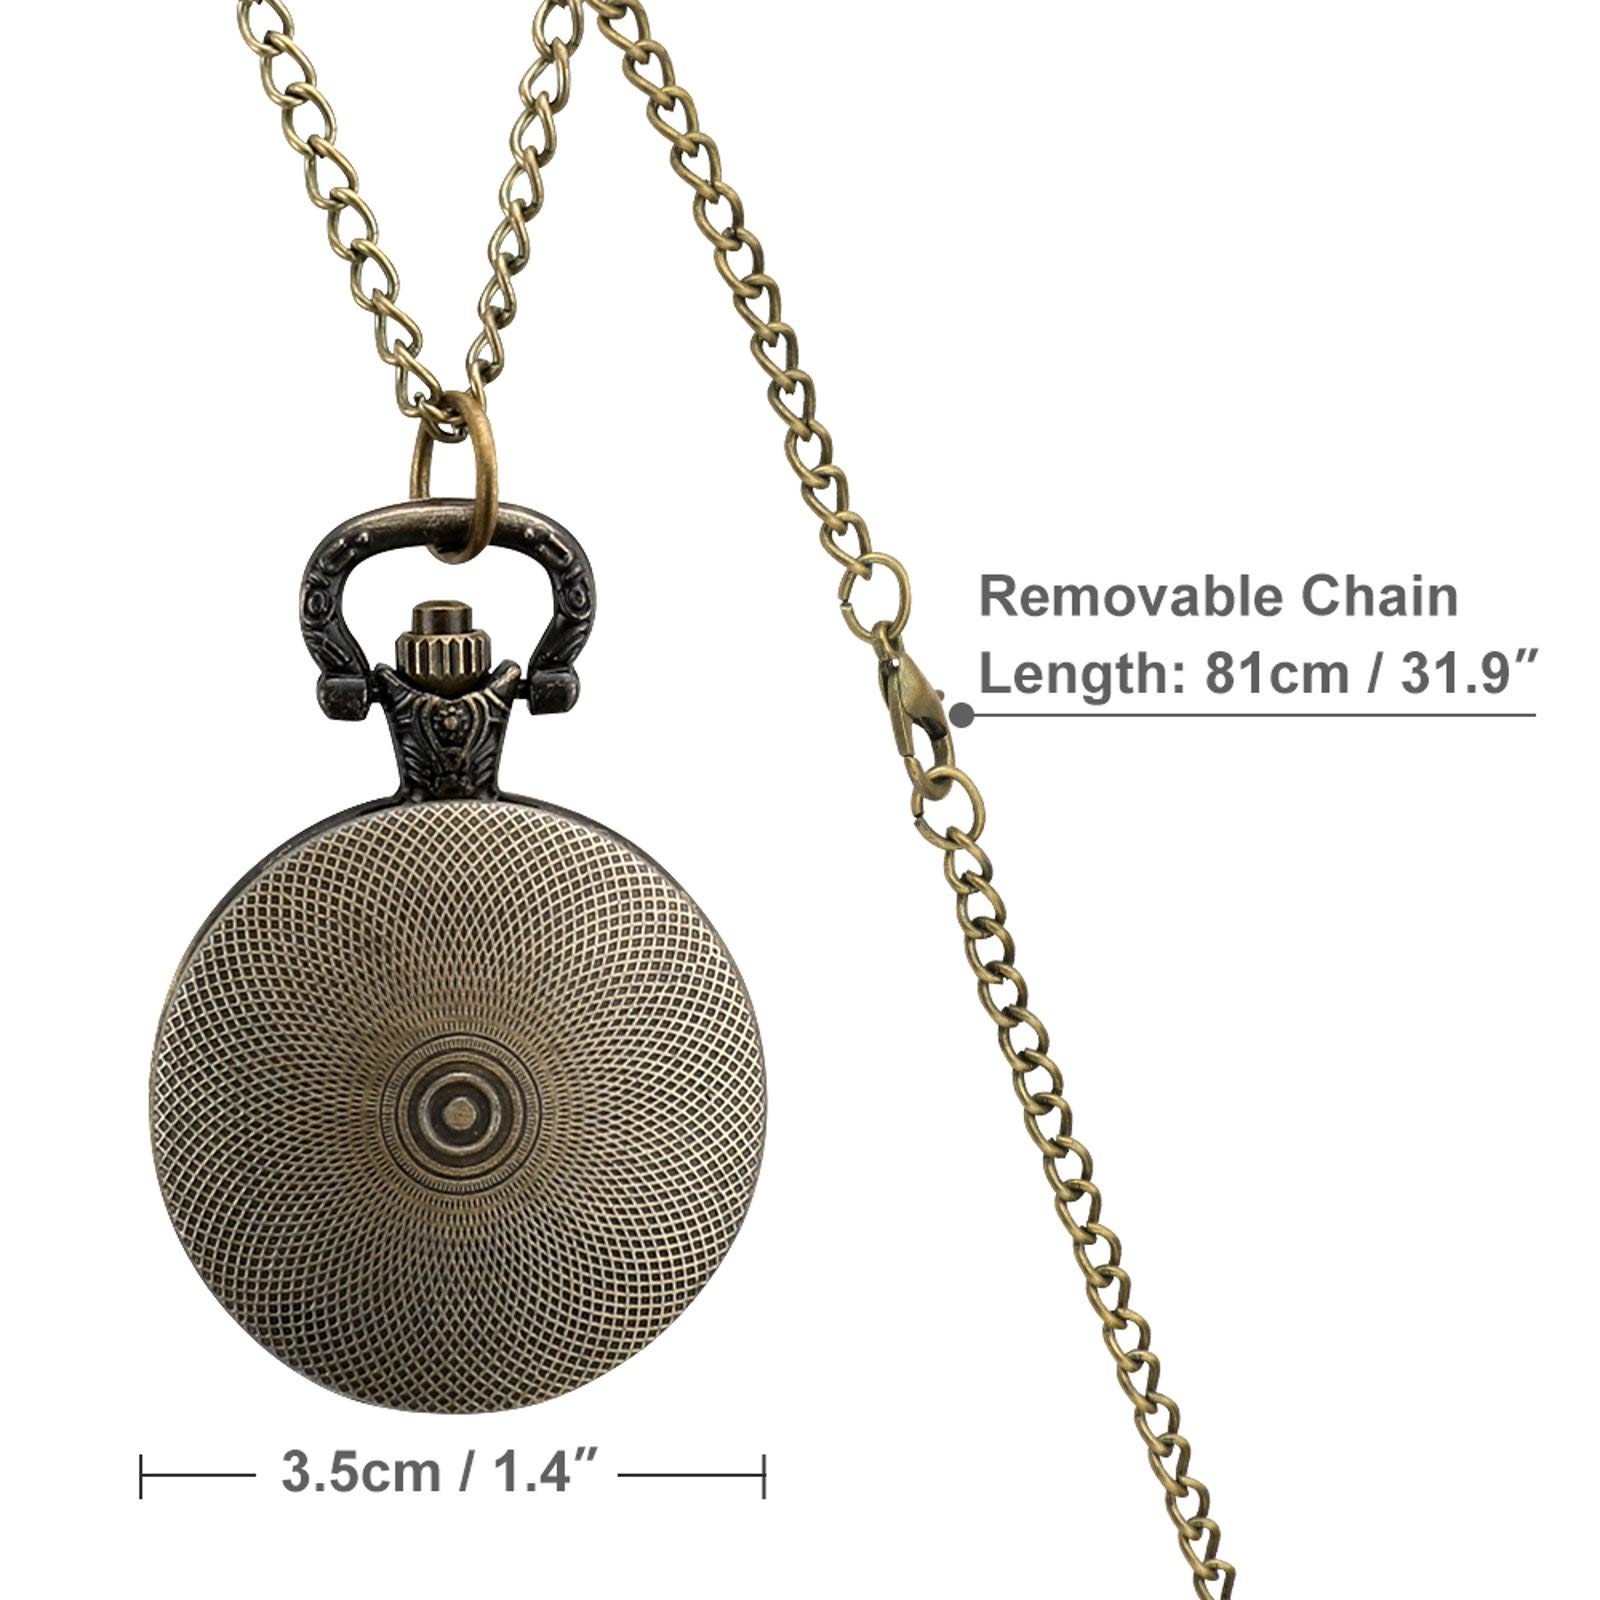 Maori Style Ethhnic Ornaments Personalized Pocket Watch Vintage Numerals Scale Quartz Watches Pendant Necklace with Chain